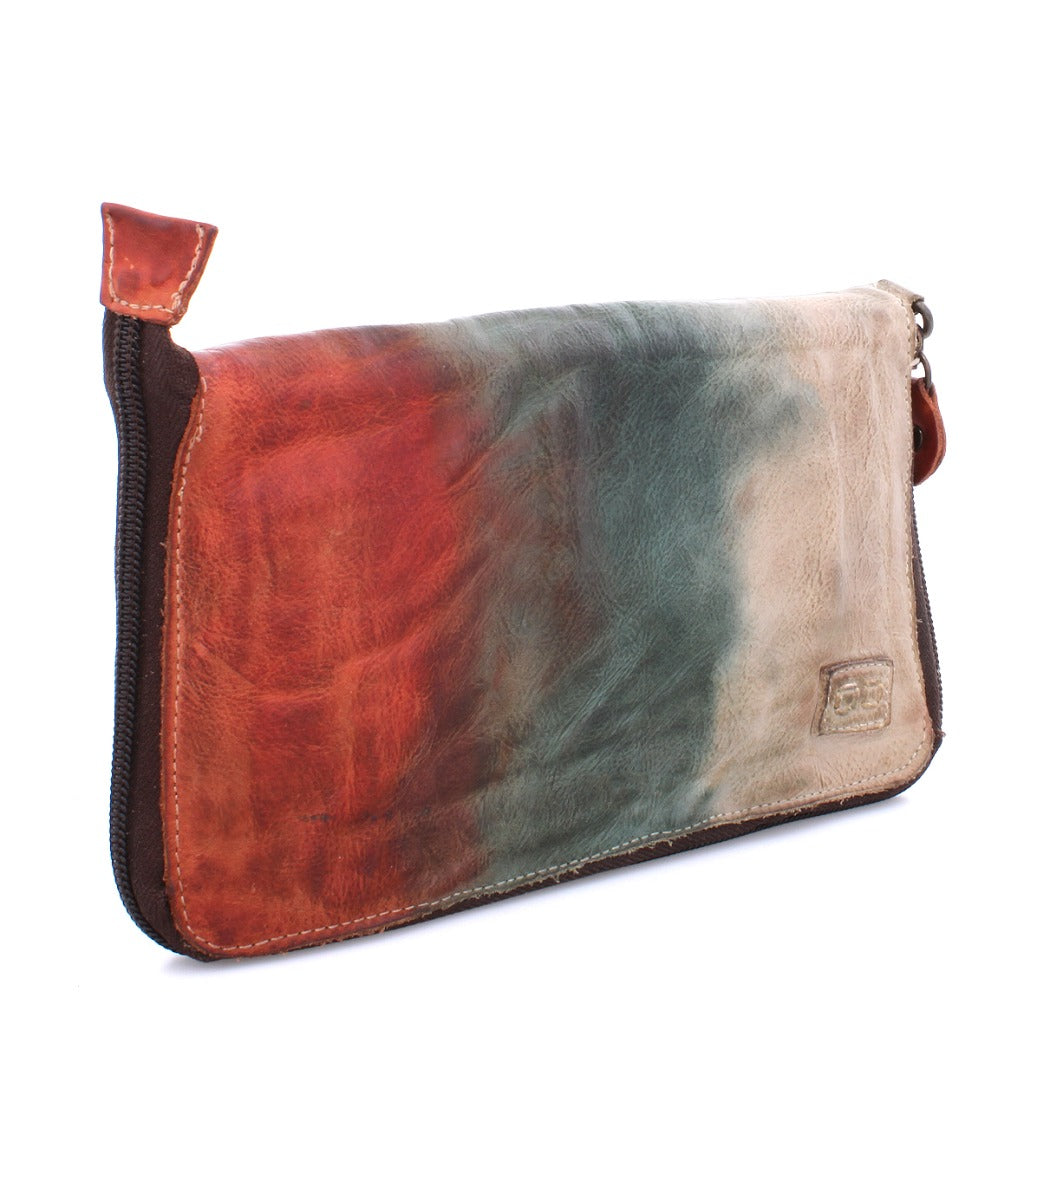 Bed Stu Templeton II colorful leather multi-functional pure leather clutch.